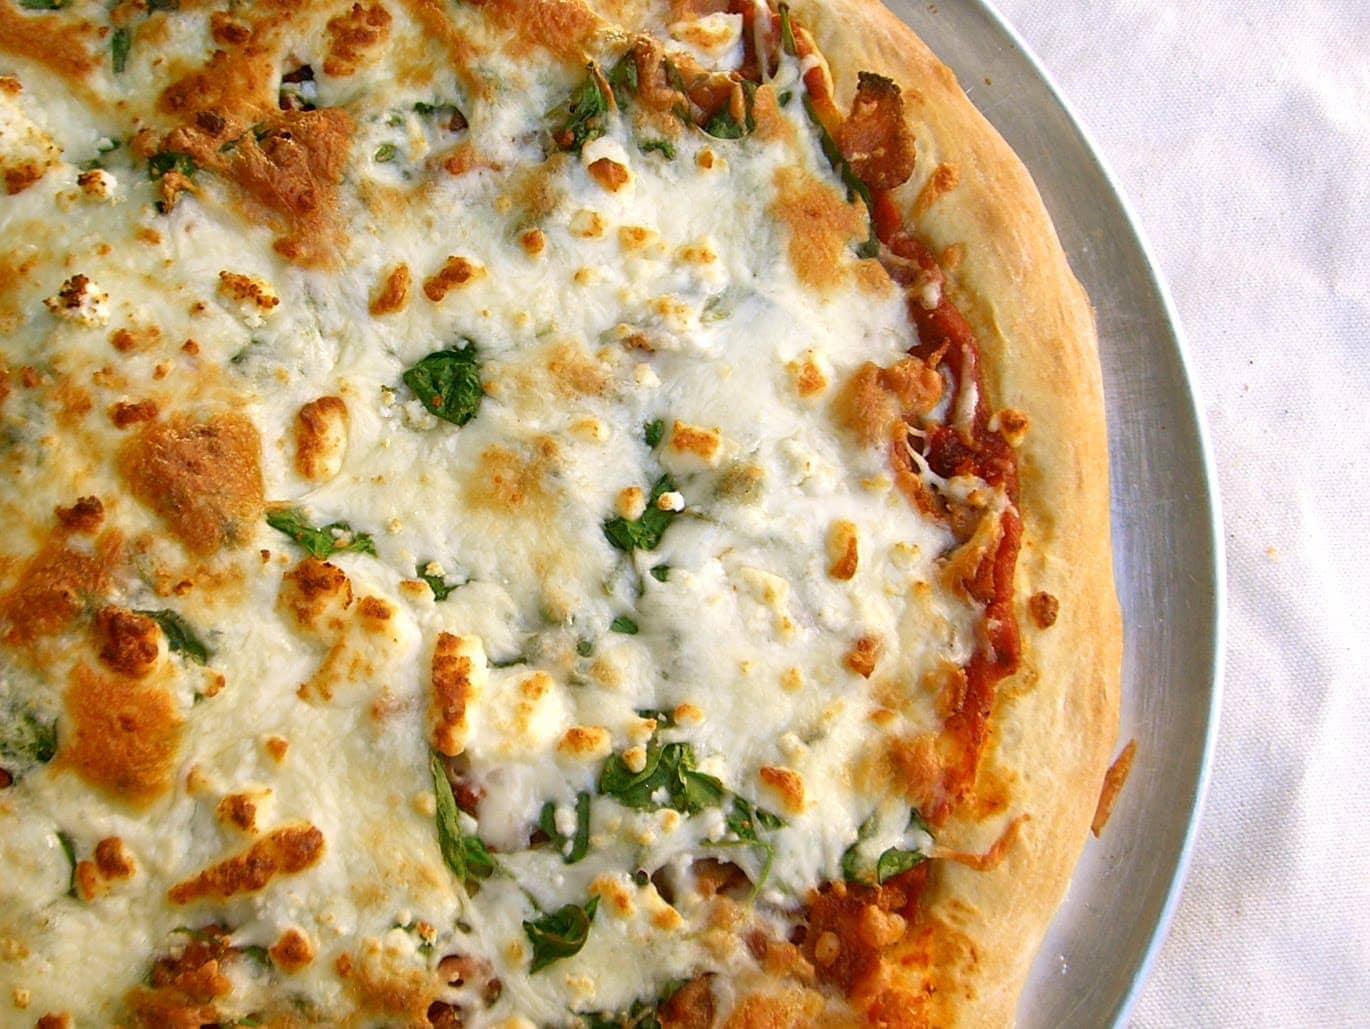 Spinach and feta pizza